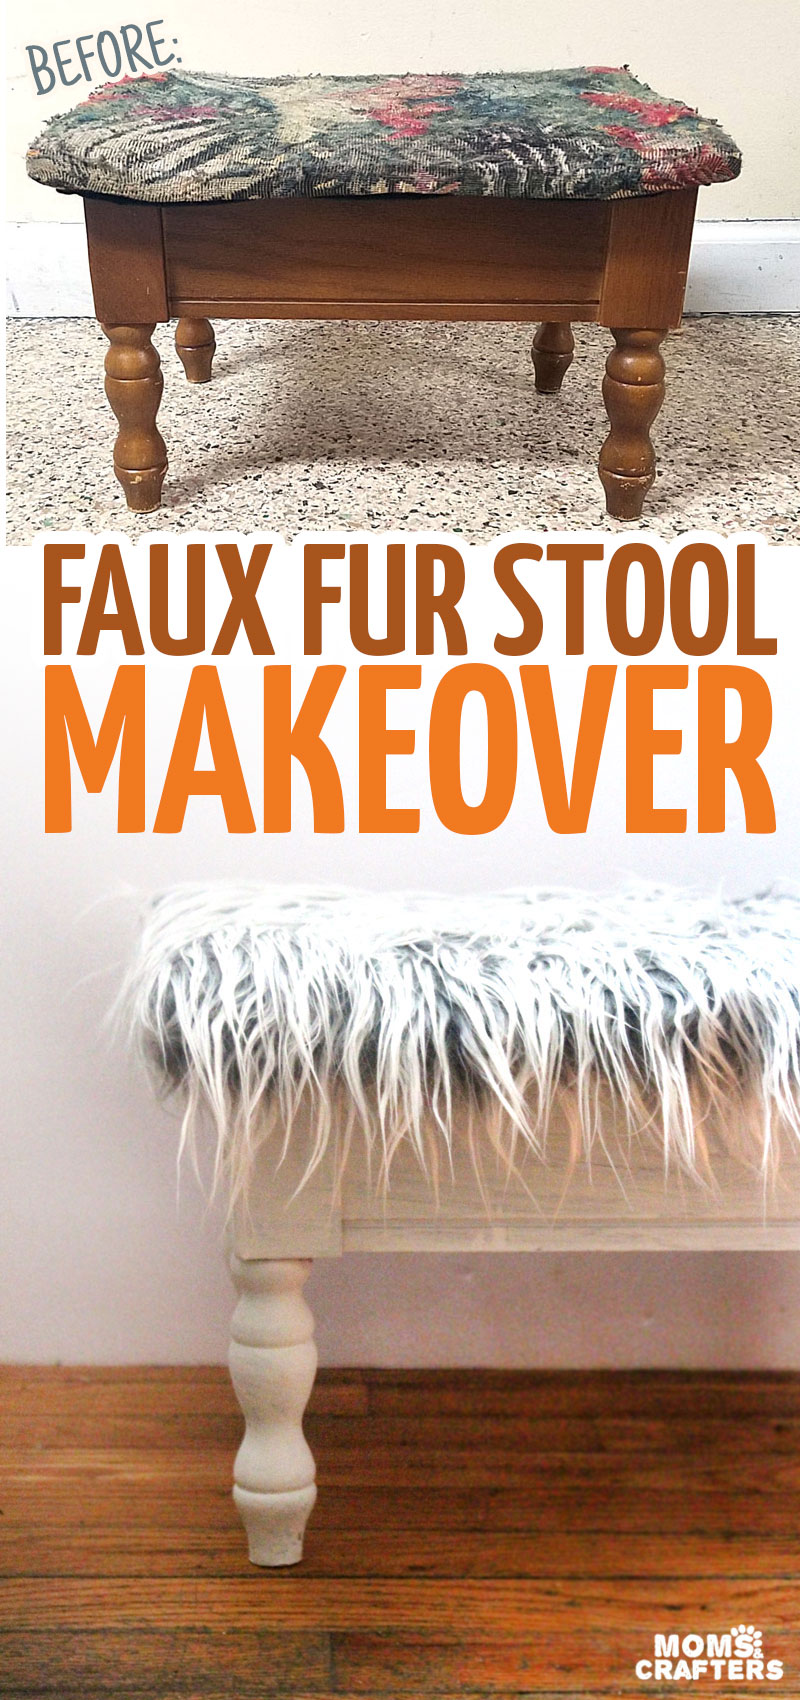 I love this DIY faux fur stool makeover from a flea market find! This ugly vintage sewing stool is transformed into beautiful DIY home decor for the craft room in under half an hour!